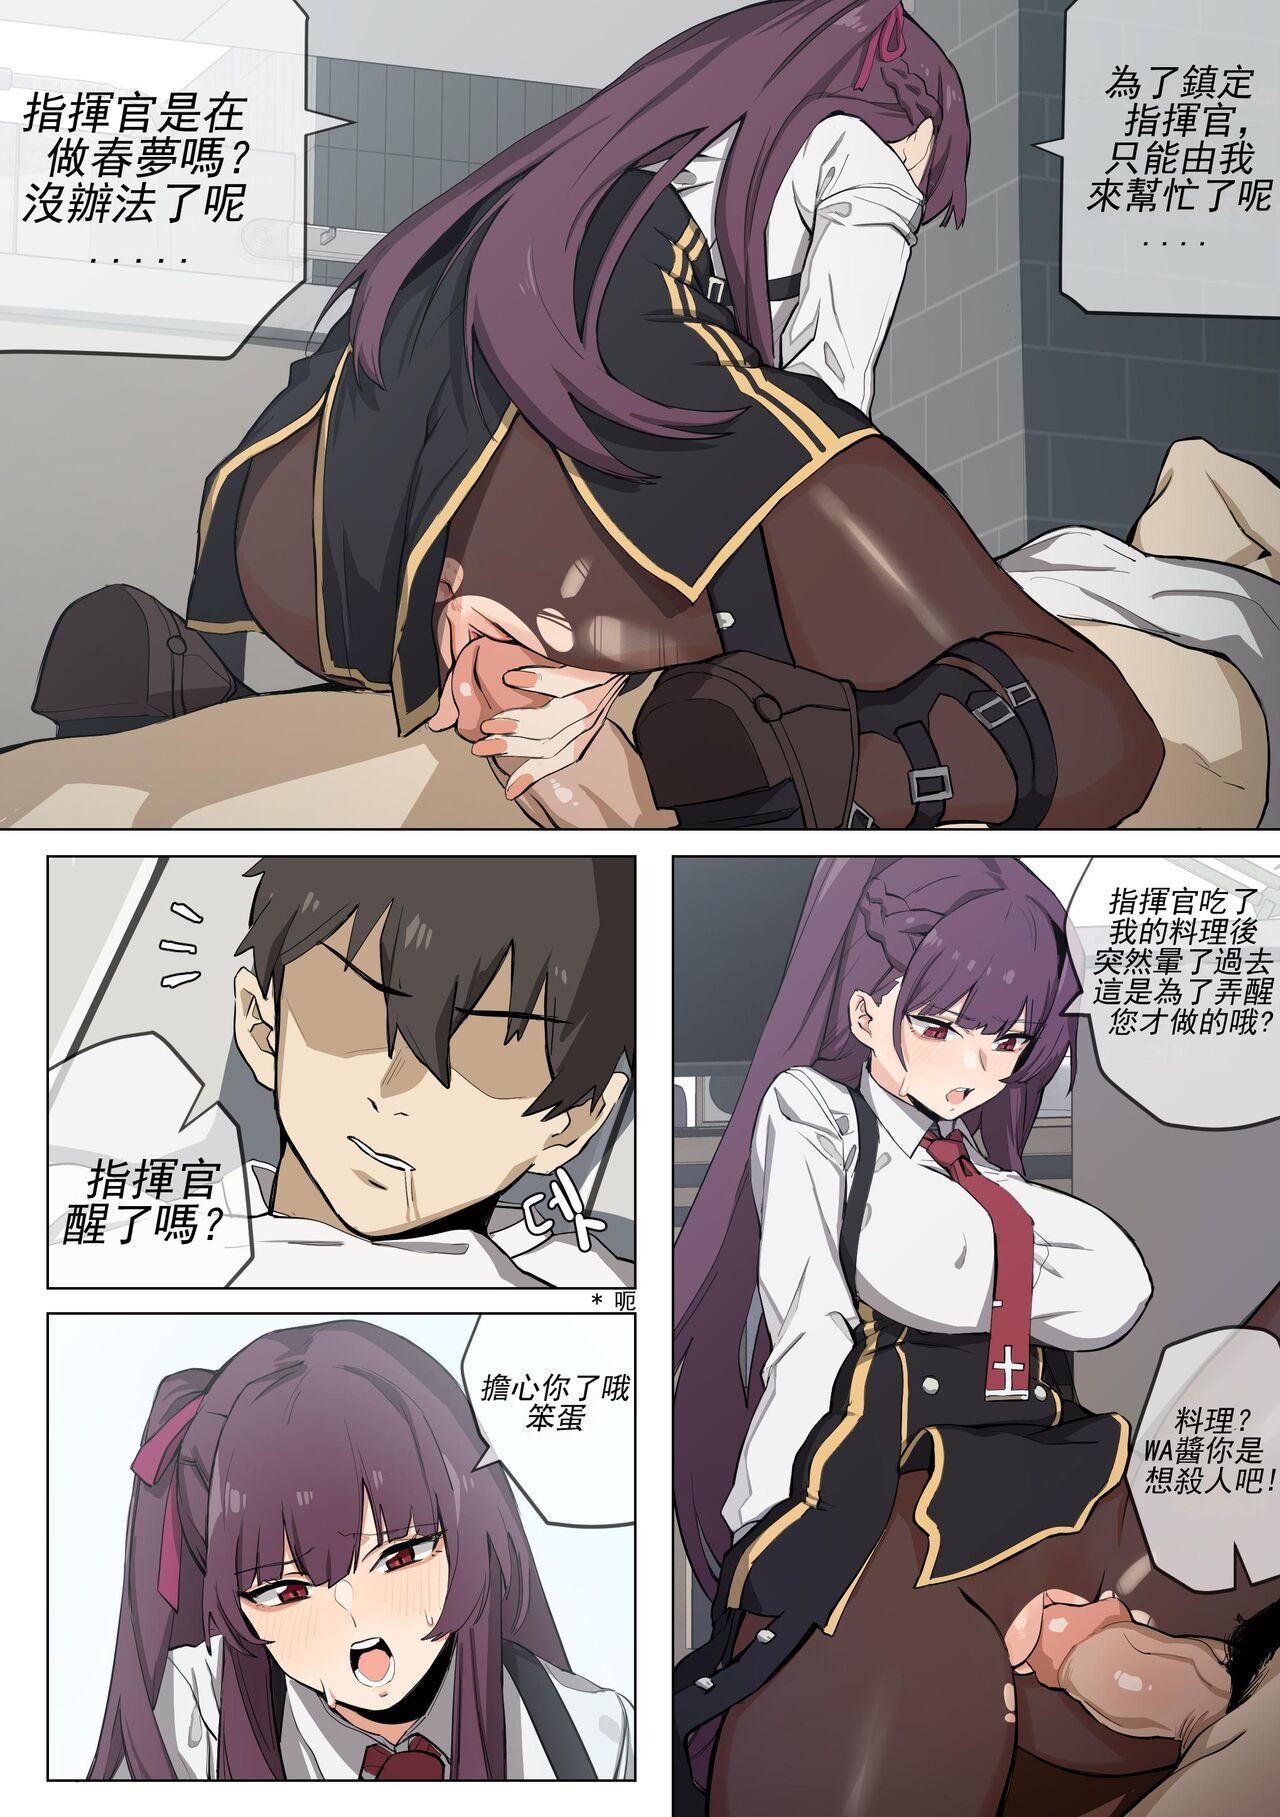 Clothed 【banssee】wa2000 （AKwoL烤肉组） Pigtails - Page 5